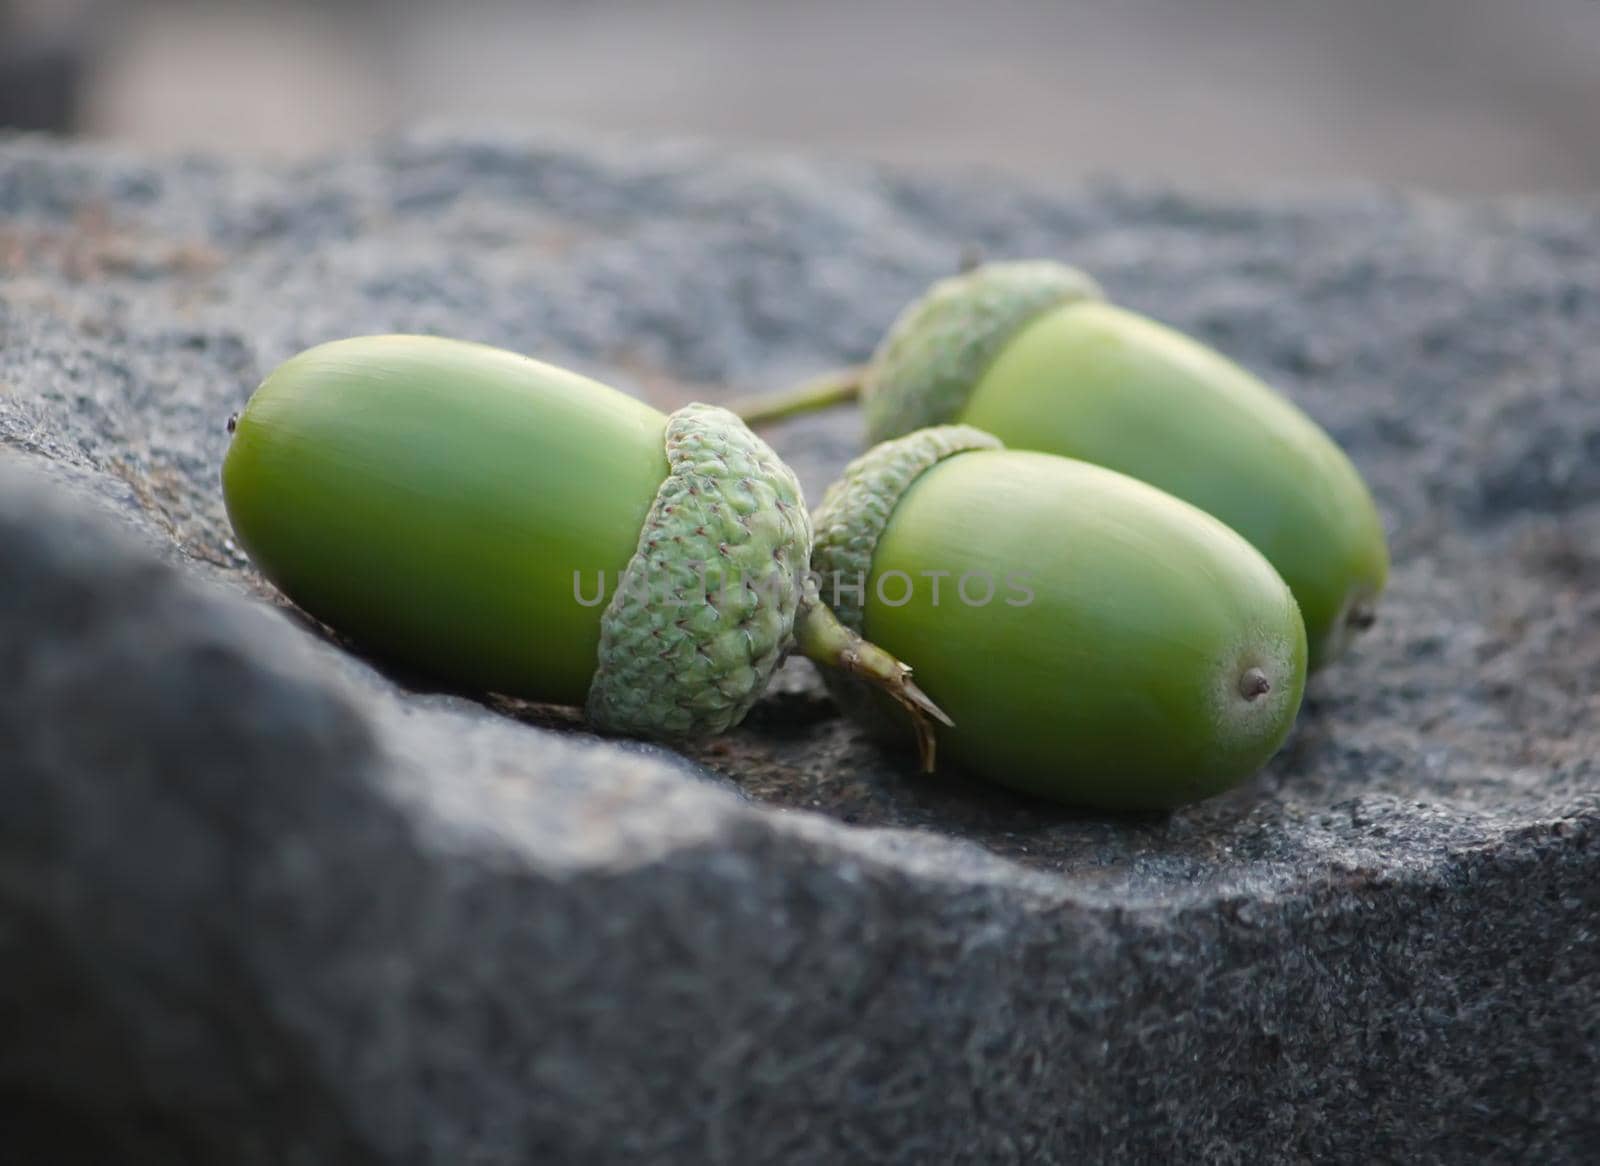 Piled heap of green acorns by nightlyviolet